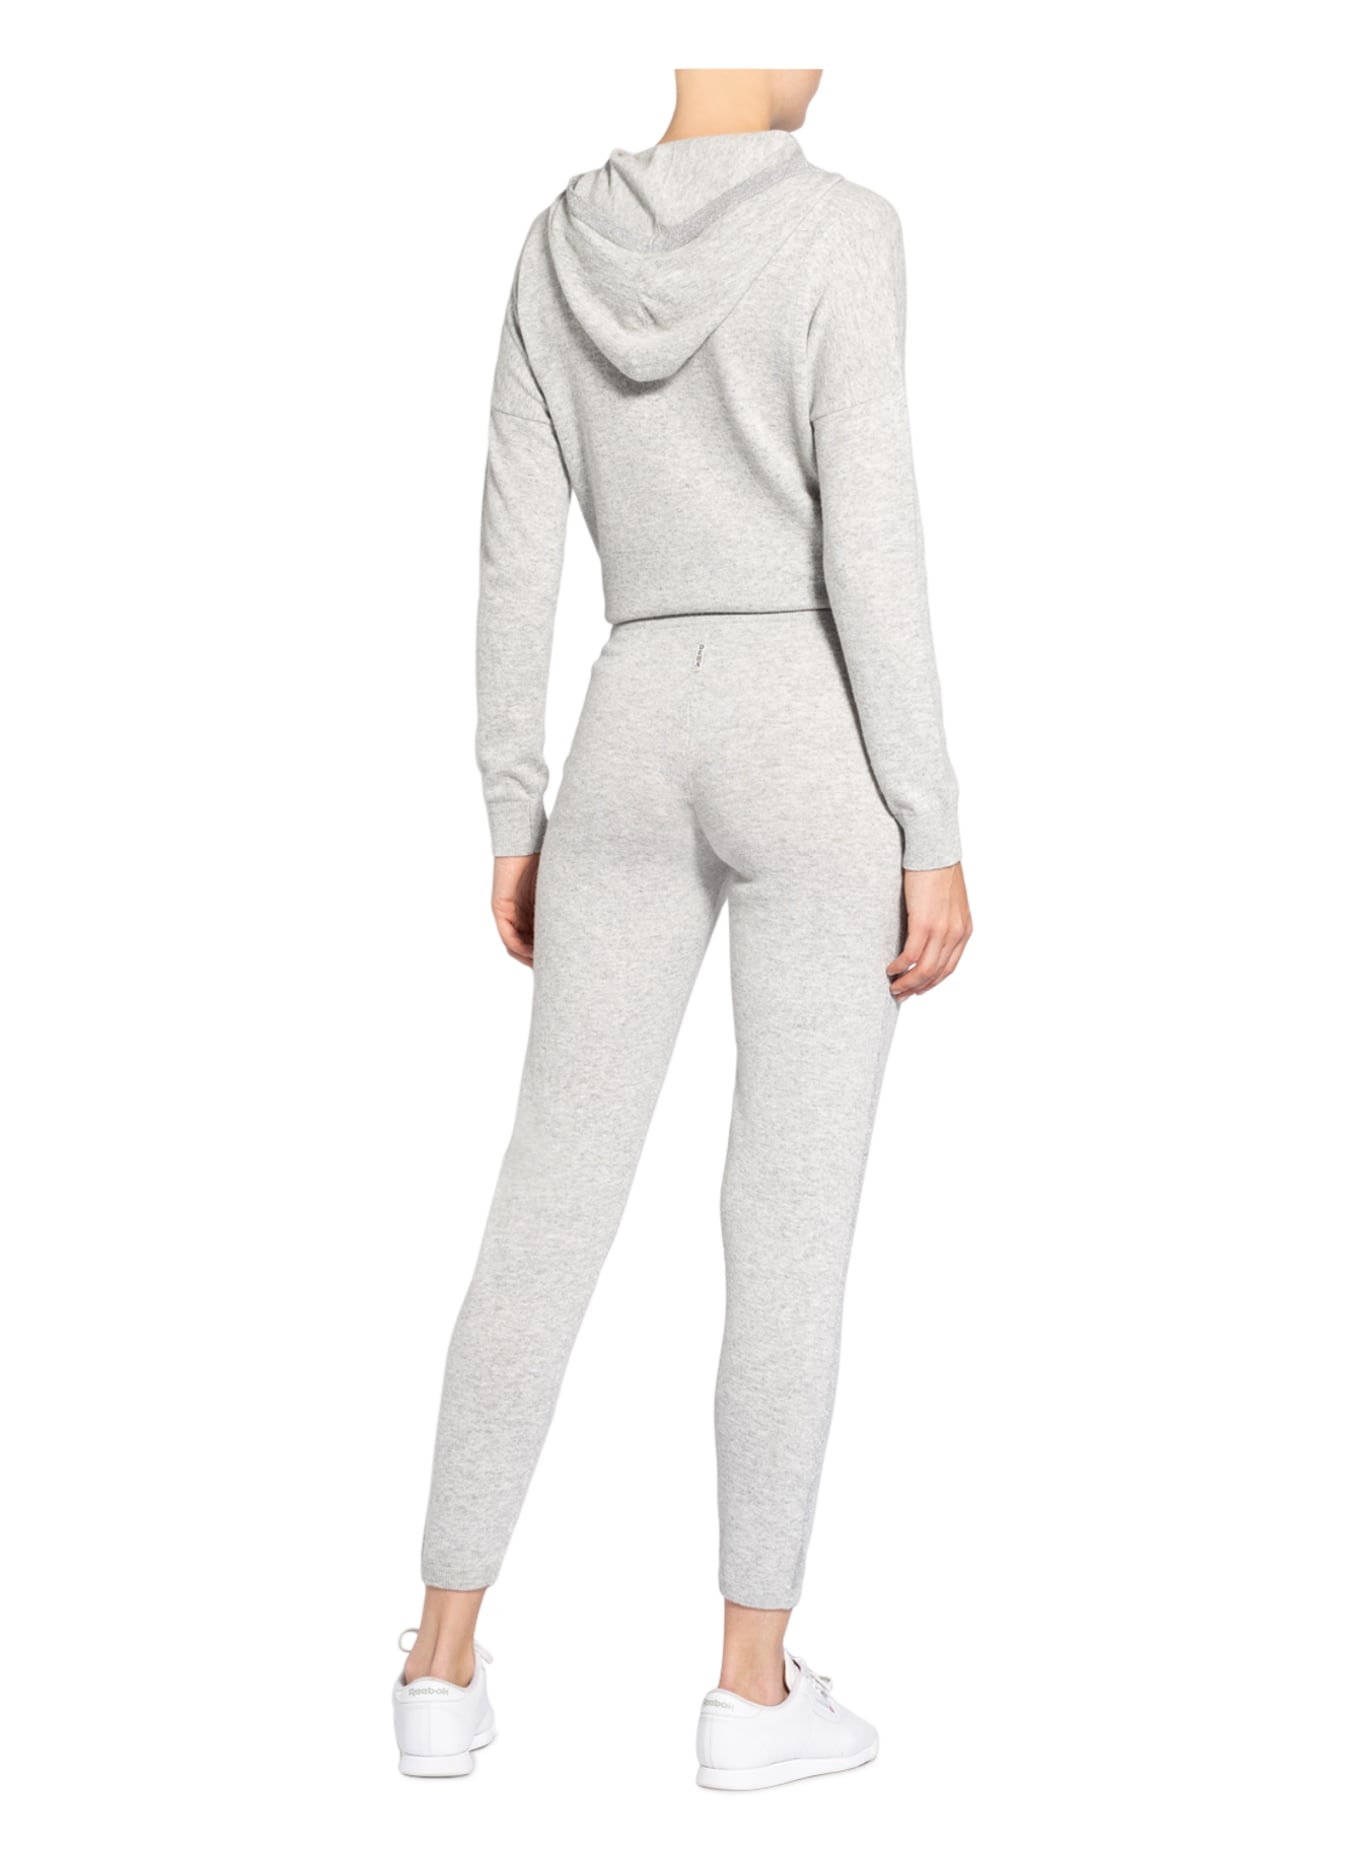 DEHA Knit fitness trousers, Color: LIGHT GRAY (Image 3)